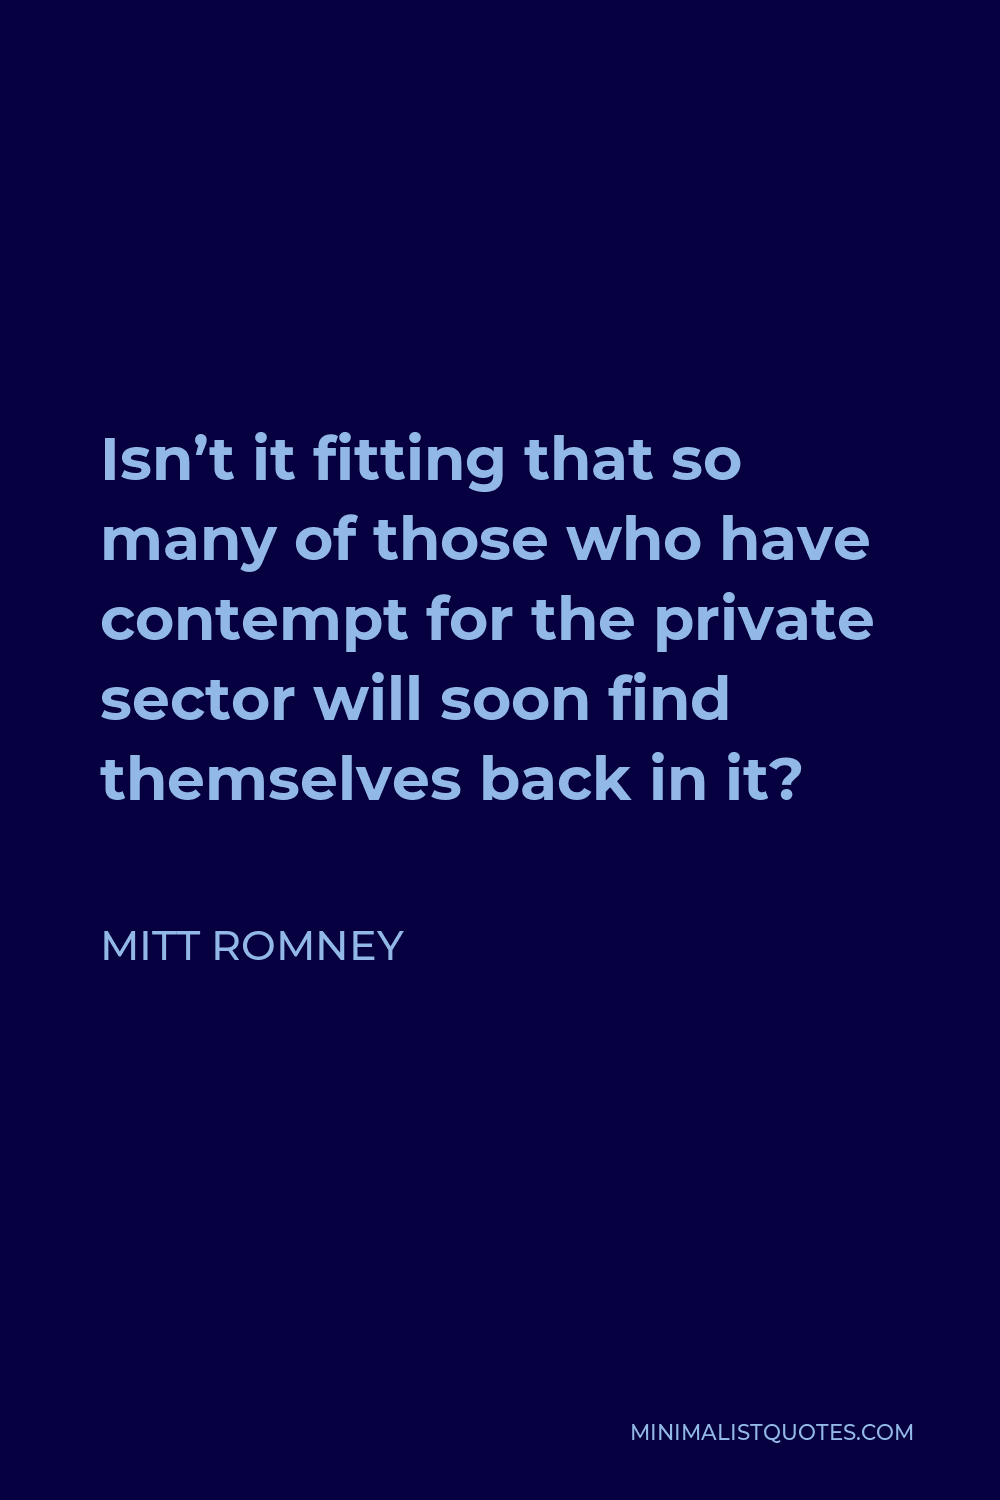 Mitt Romney Quote - Isn’t it fitting that so many of those who have contempt for the private sector will soon find themselves back in it?